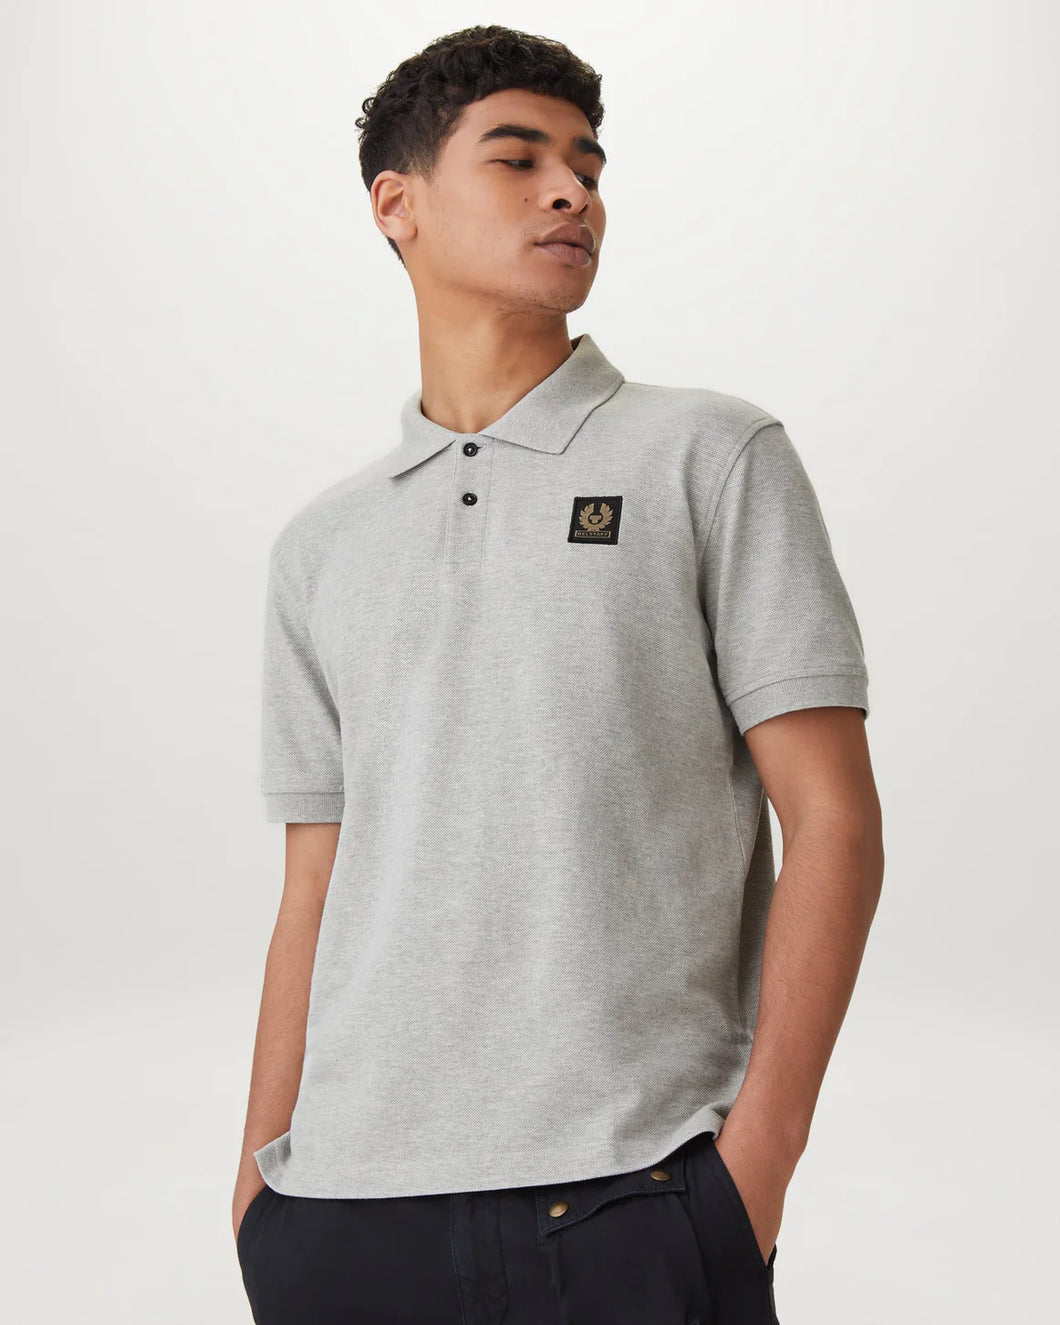 Belstaff Mens Polo in Old Silver Heather